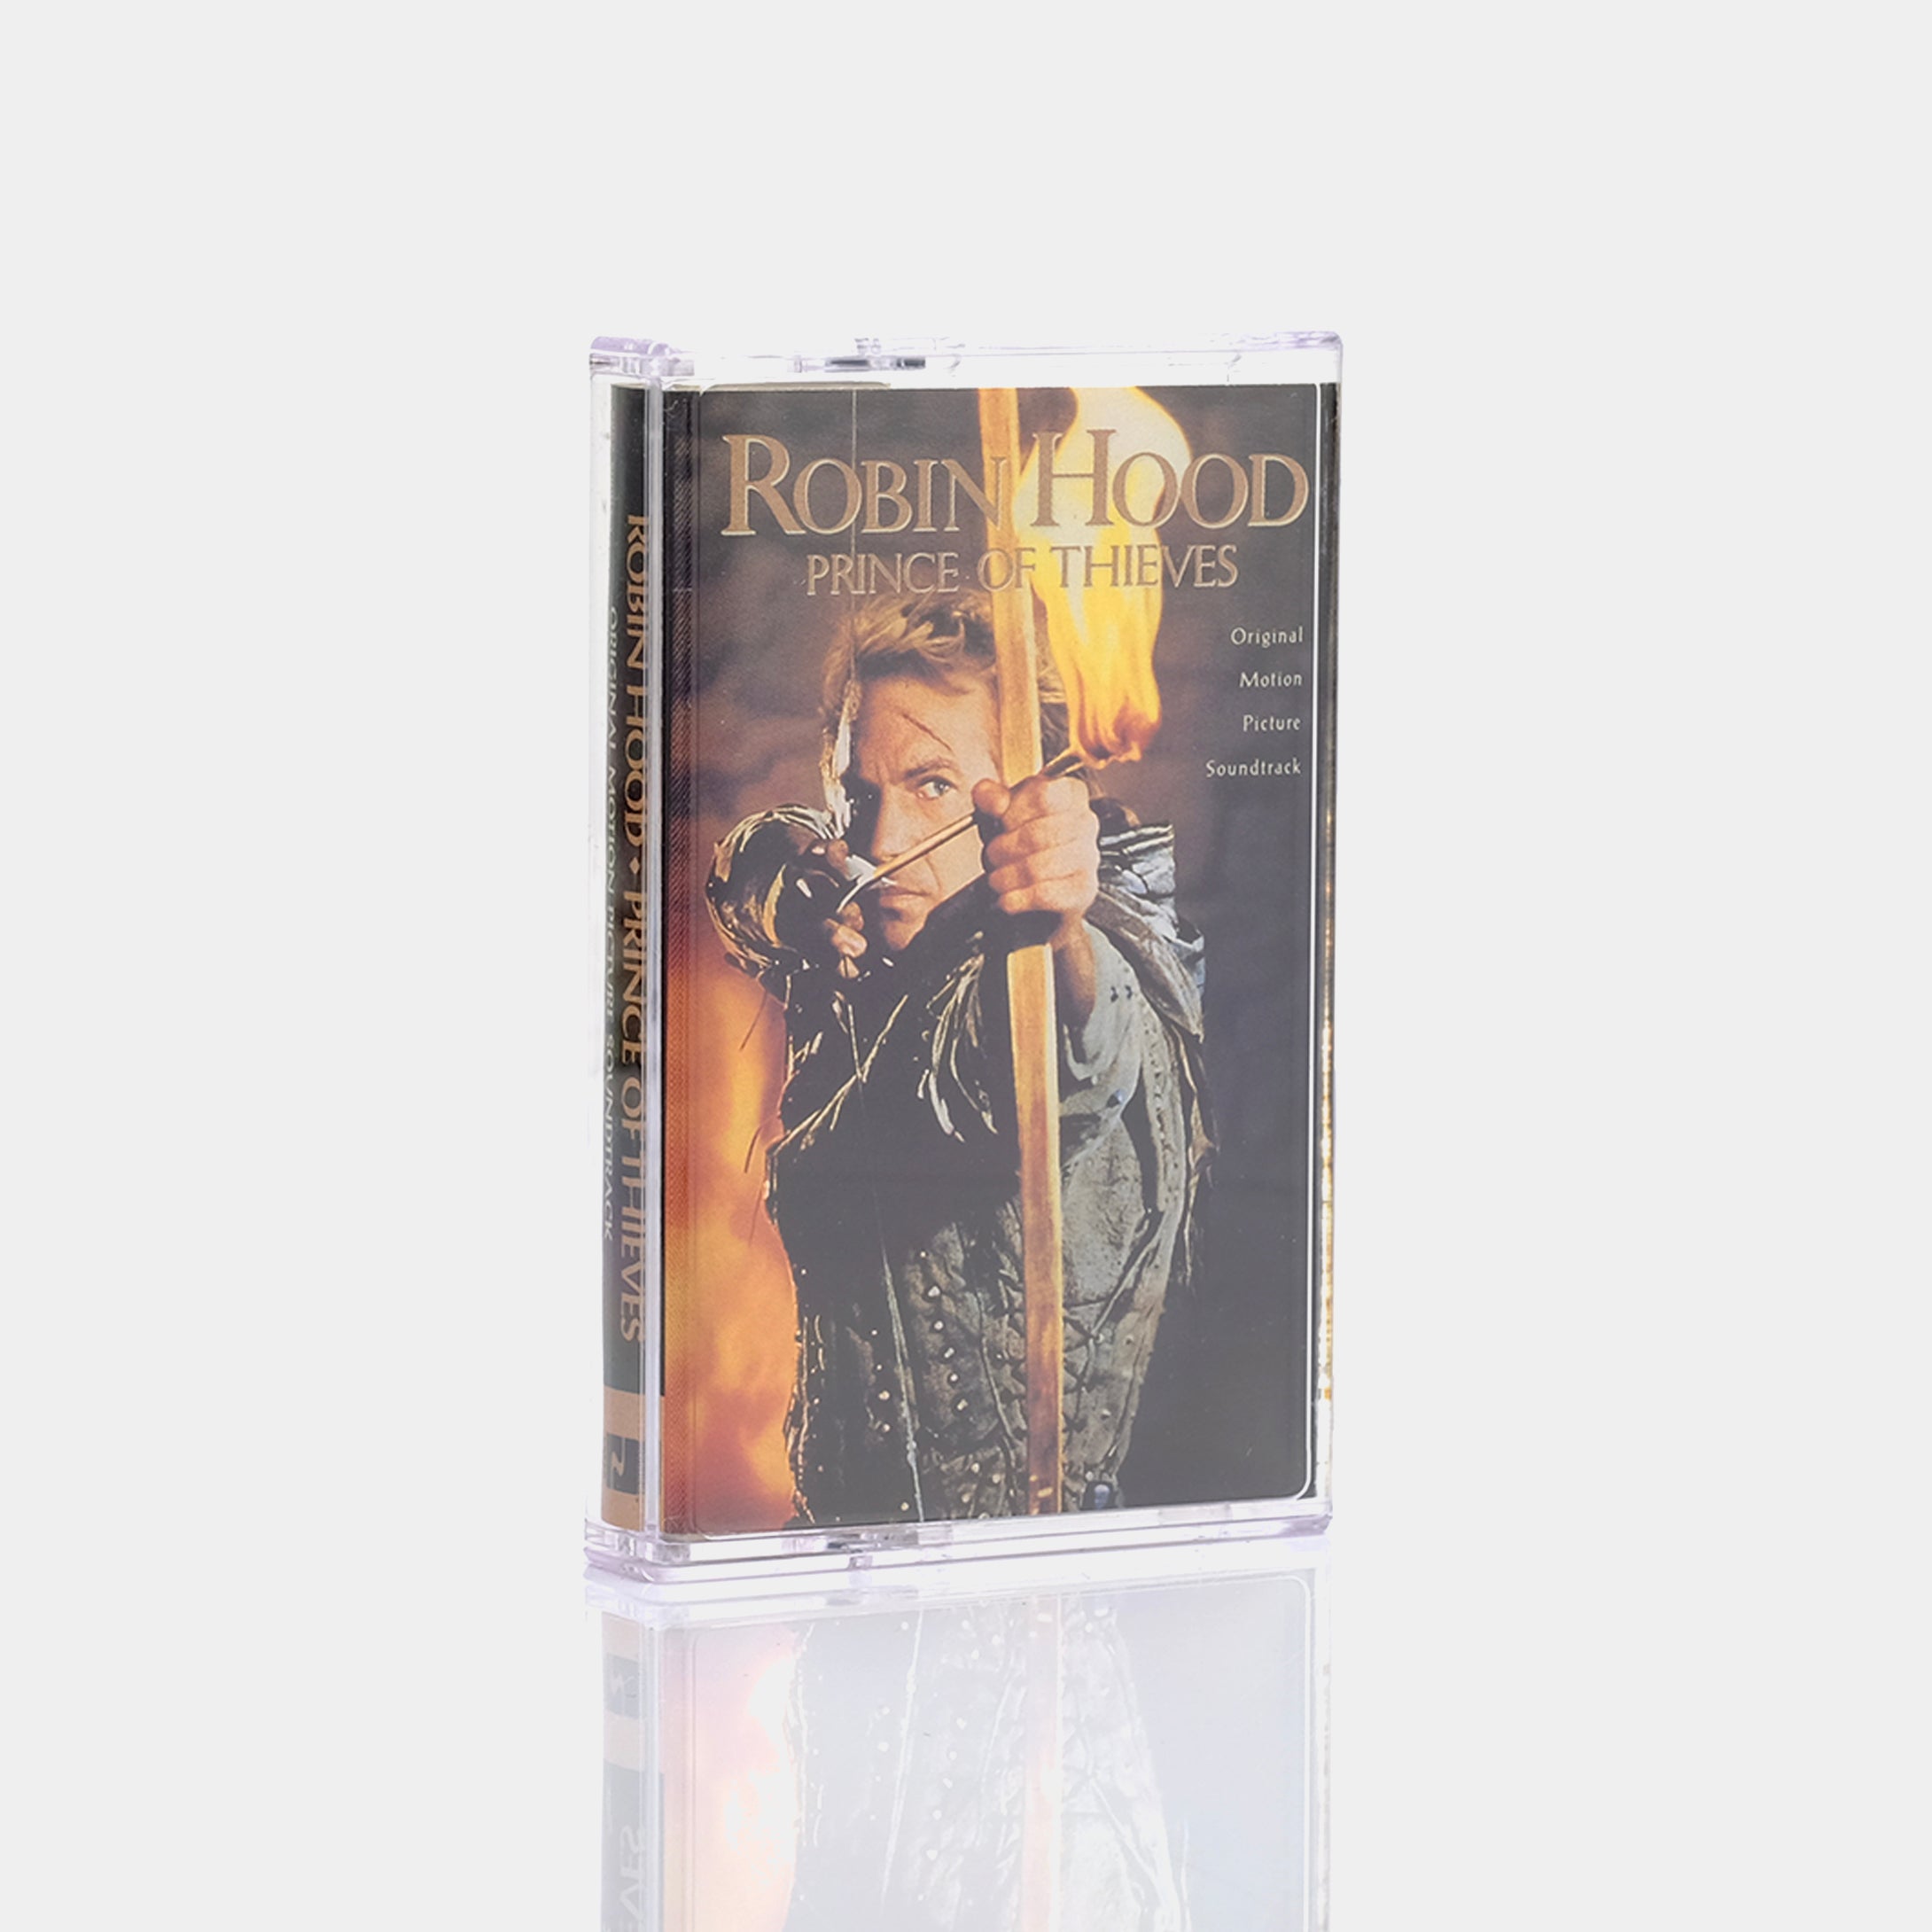 Robin Hood: Prince of Thieves (Original Motion Picture Soundtrack) Cassette Tape